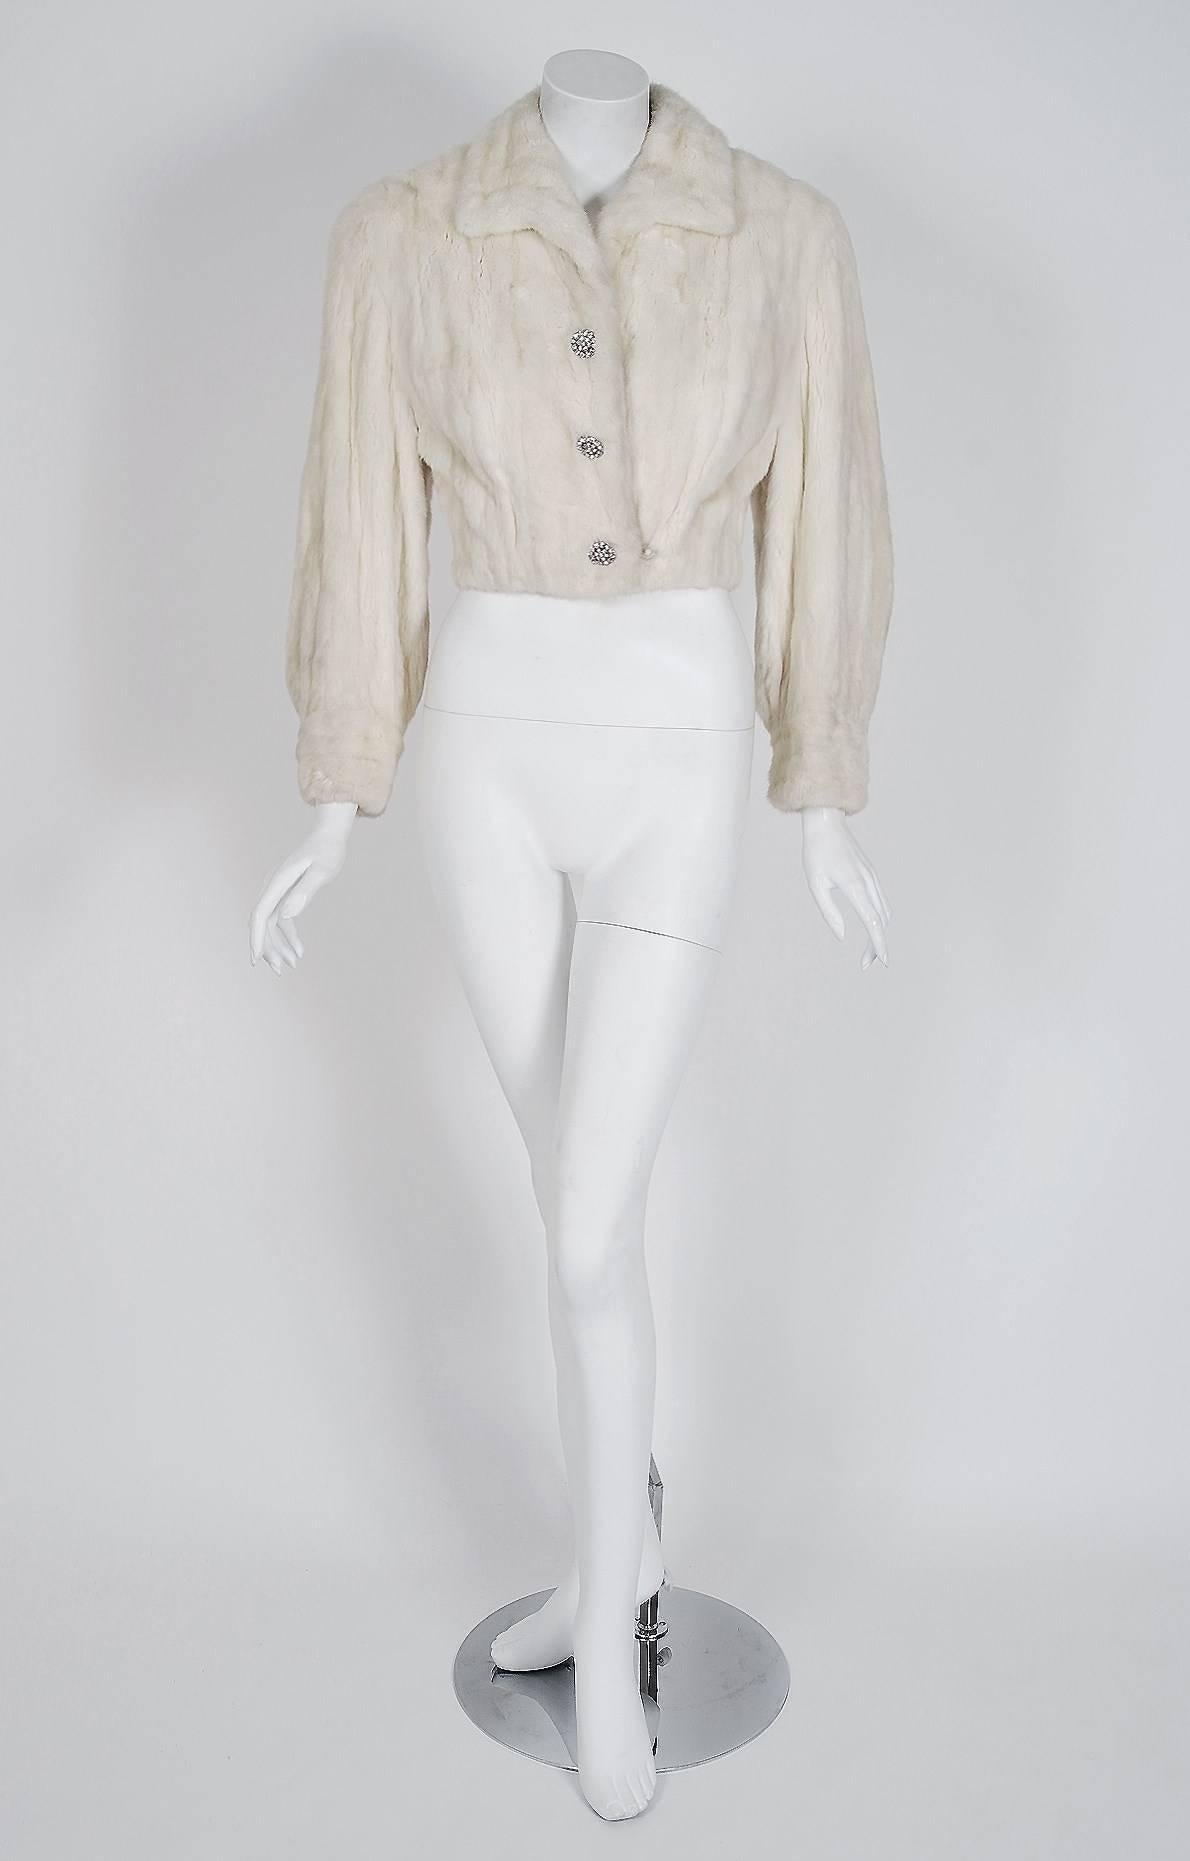 A breathtaking, ivory-white colored genuine Ermine fur from the exclusive high-end New York boutique 